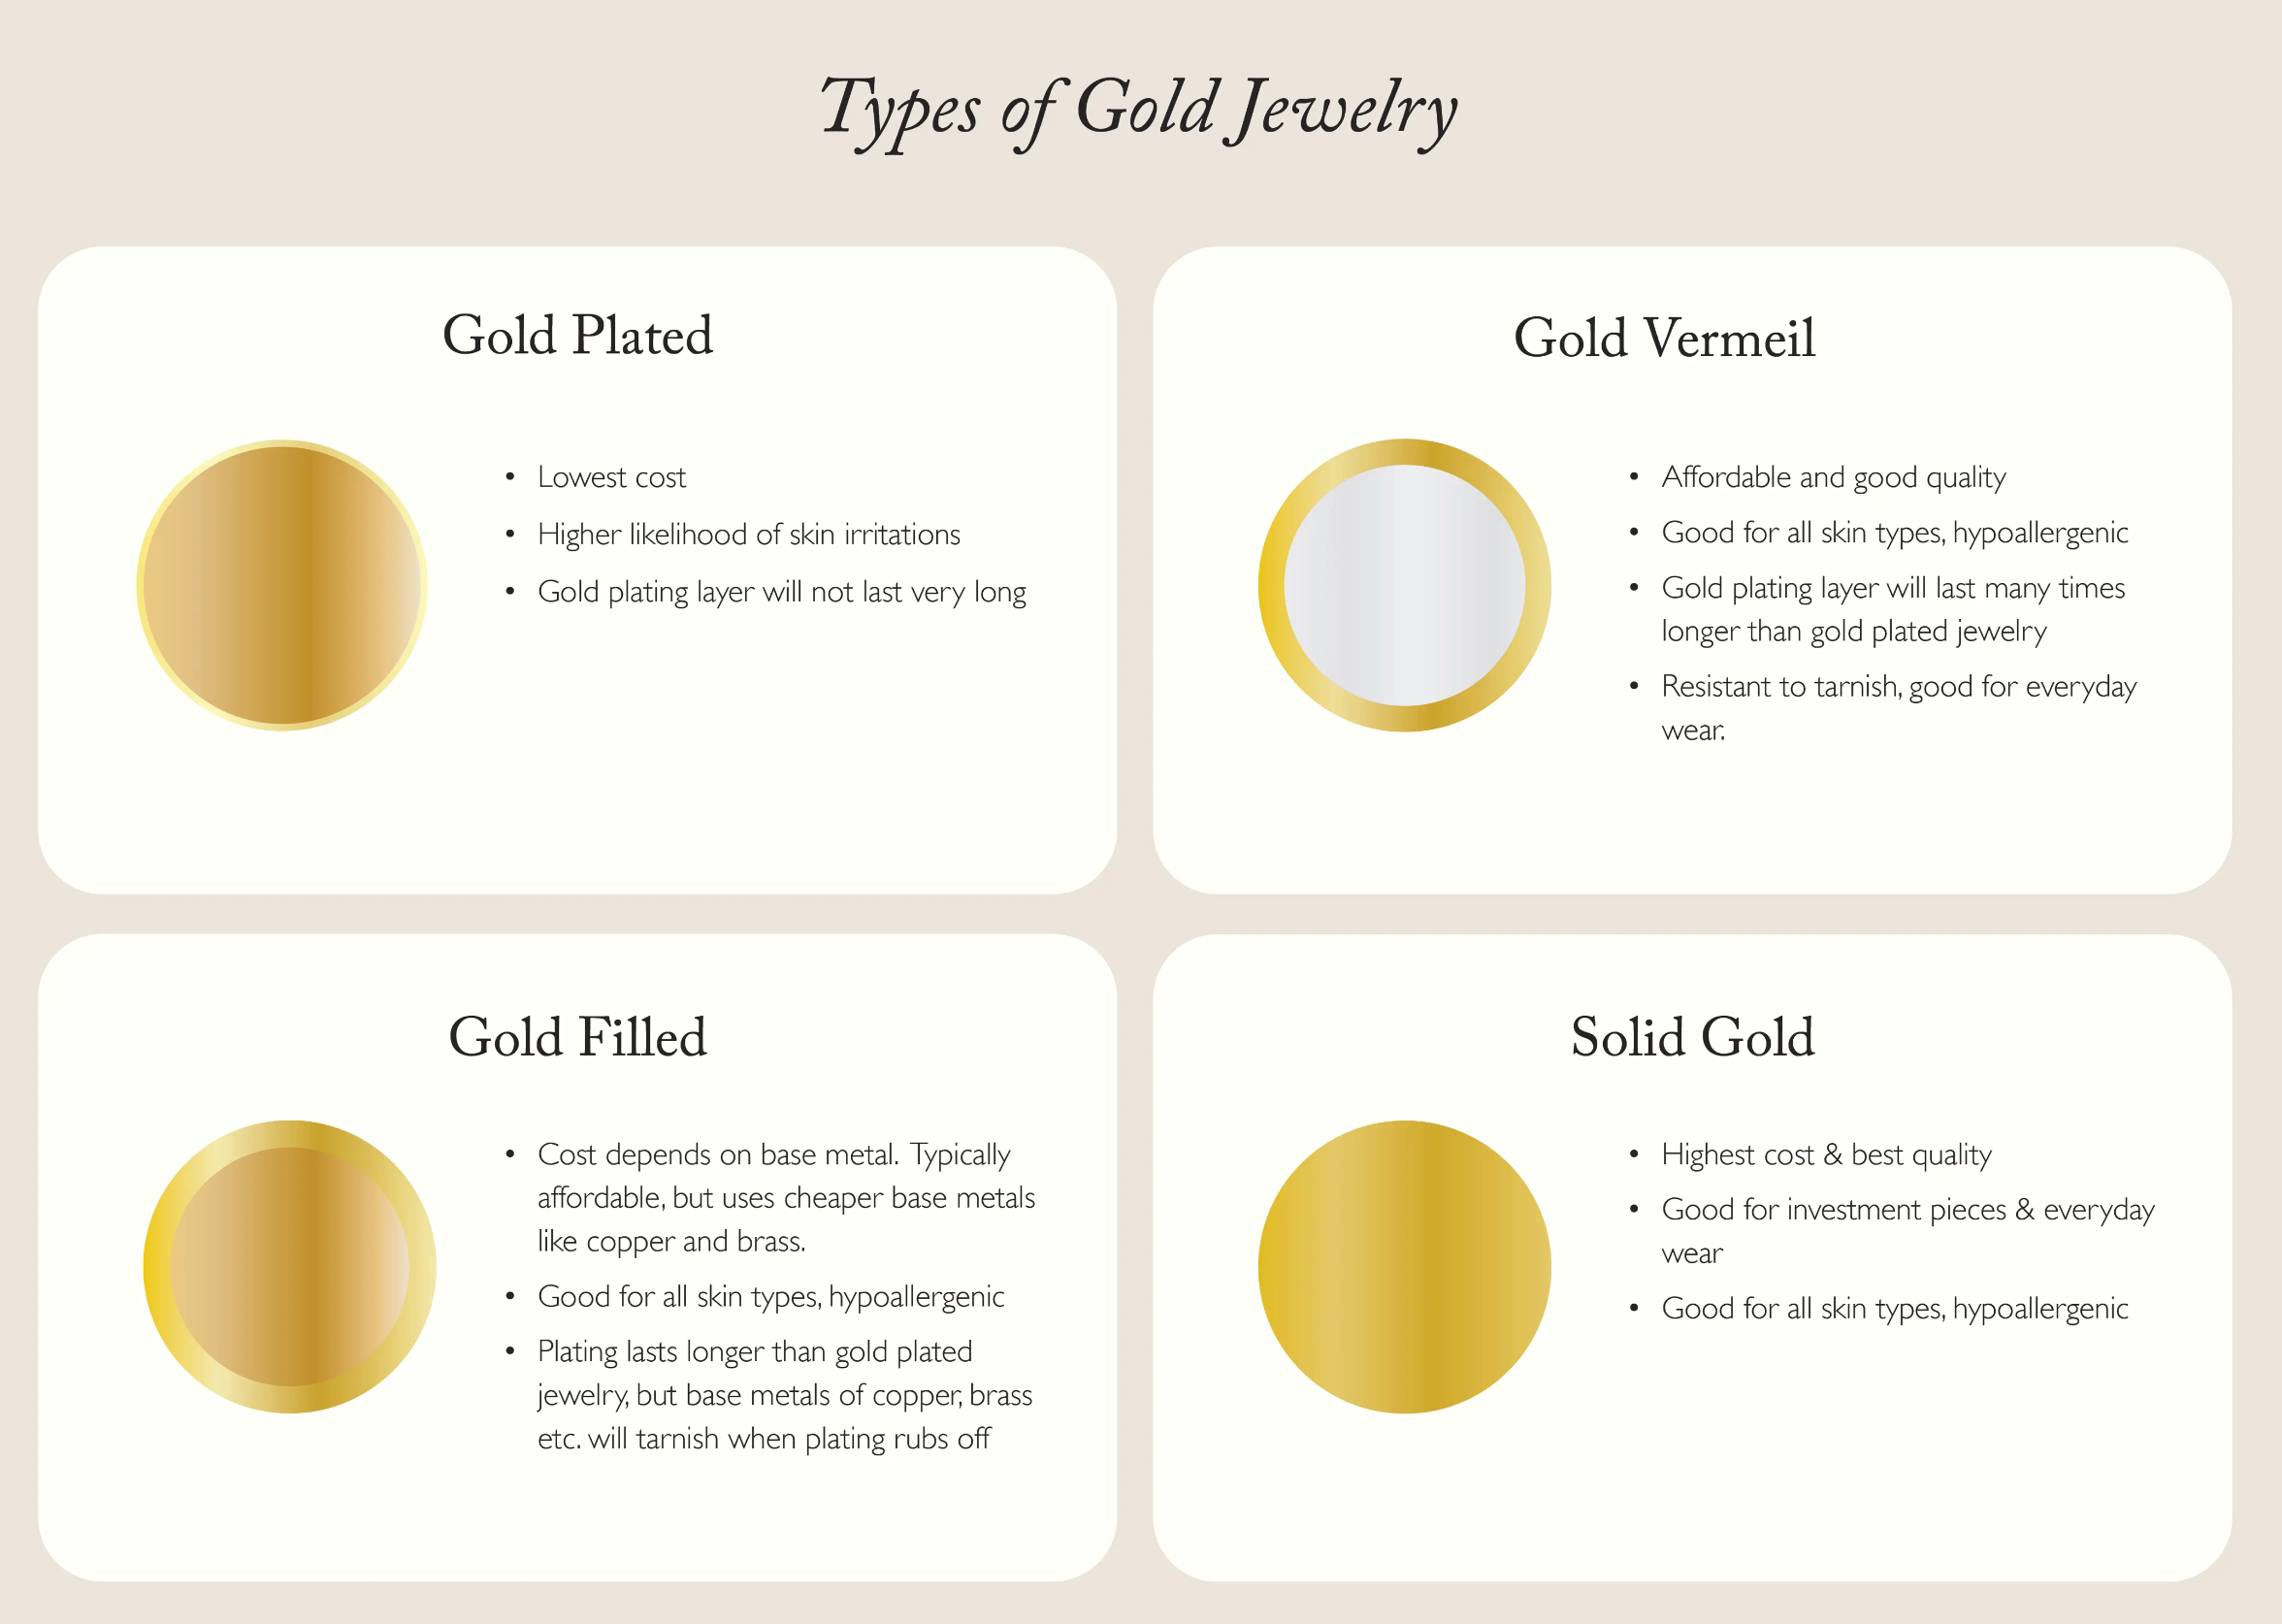 Vermeil Vs. Gold Plated Vs. Gold Filled - Which is Better?